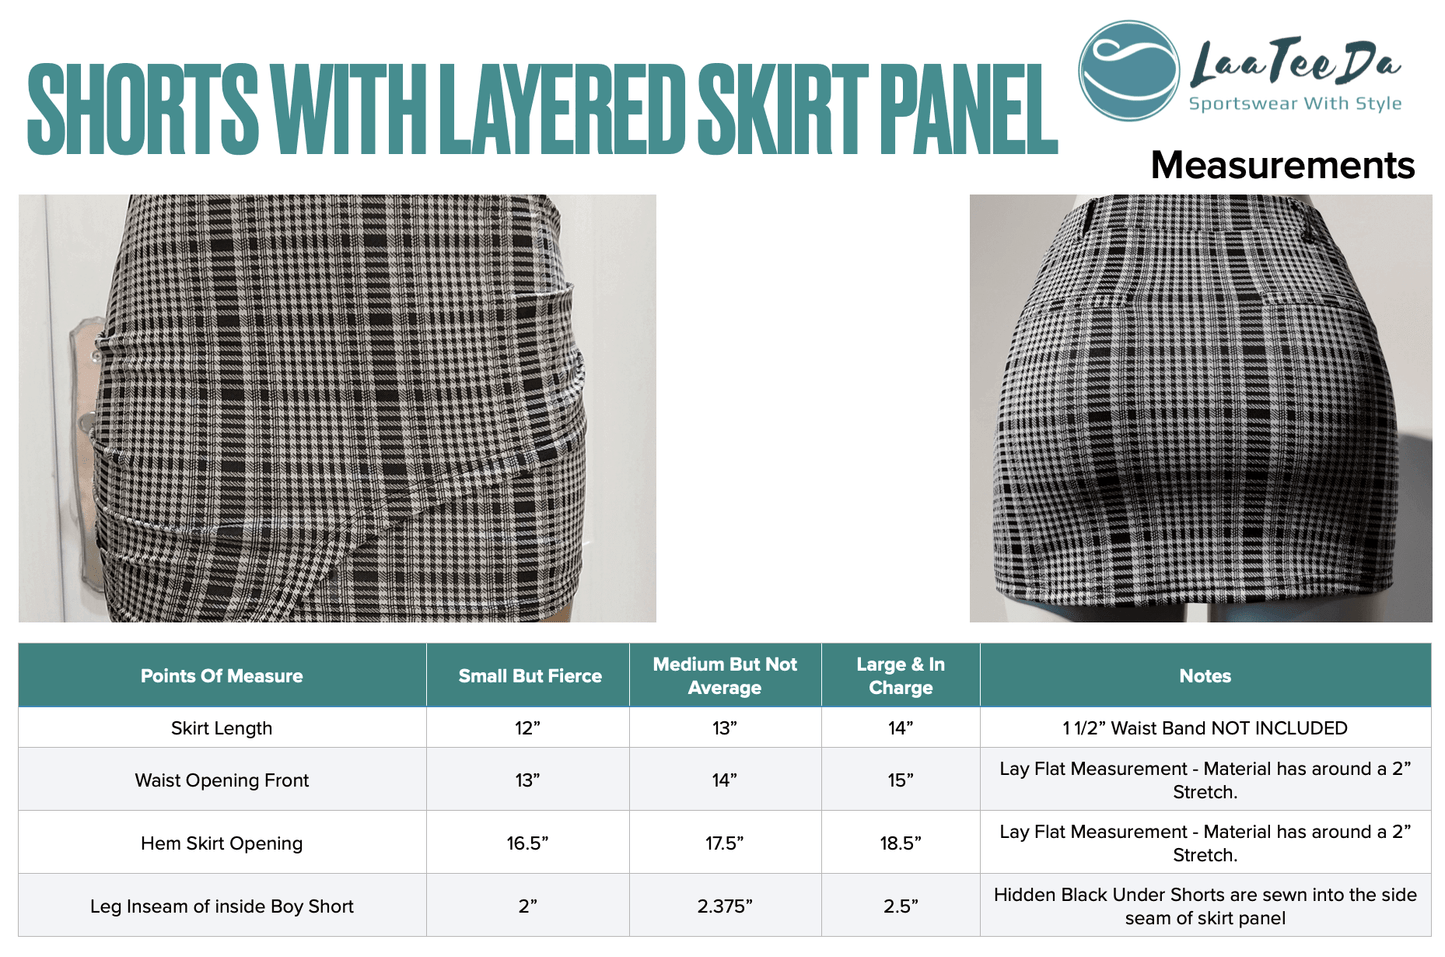 Size Chart LaaTeeDa Women’s Golf Skort Skirt - With Stretchy Under Boy Shorts and Layered Skirt Panel